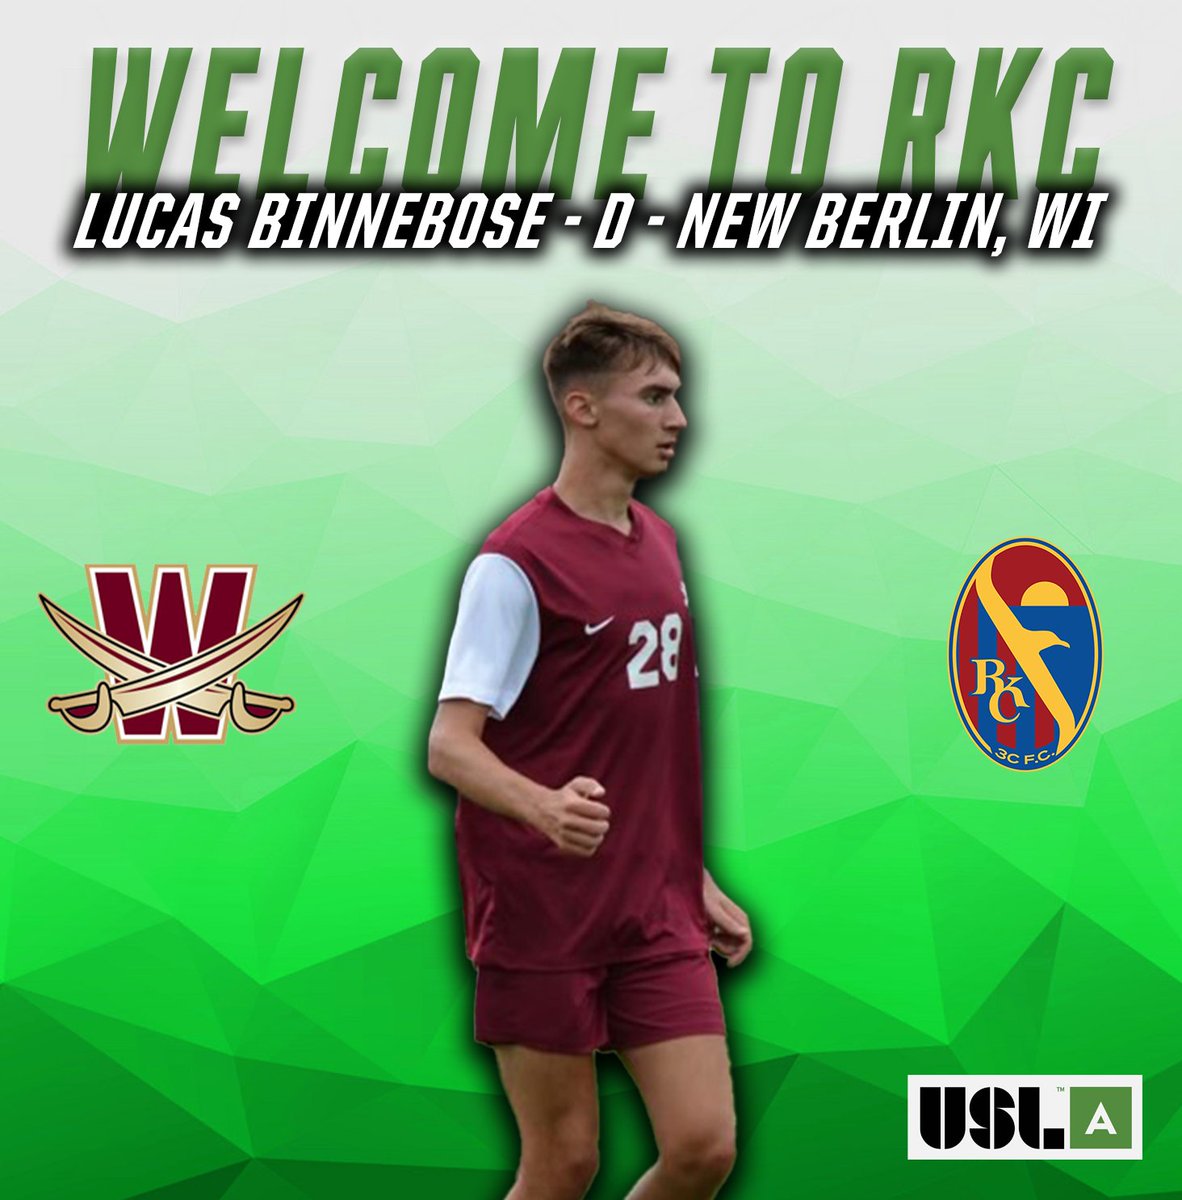 ➤ Griffin Meisterheim, Croatian Eagles SC, J.I. Case HS
➤ Lucas Binnebose, Bavarian United SC MLS Next, Walsh University

#262Made | #BringYourAGame

Interested in joining the club? Head to our website to learn more!